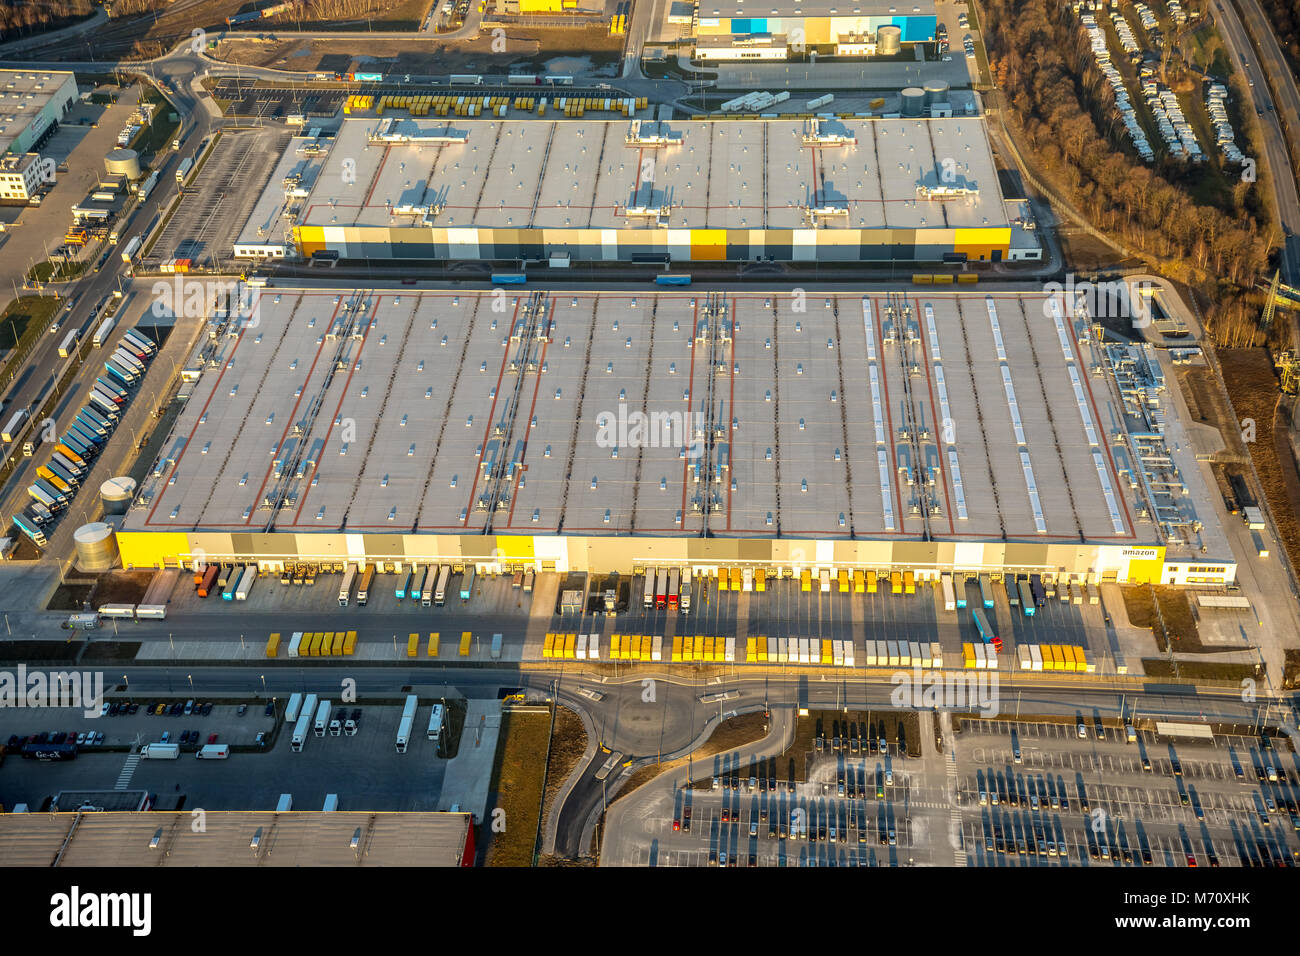 Page 2 - Parking Lot High Resolution Stock Photography and Images - Alamy